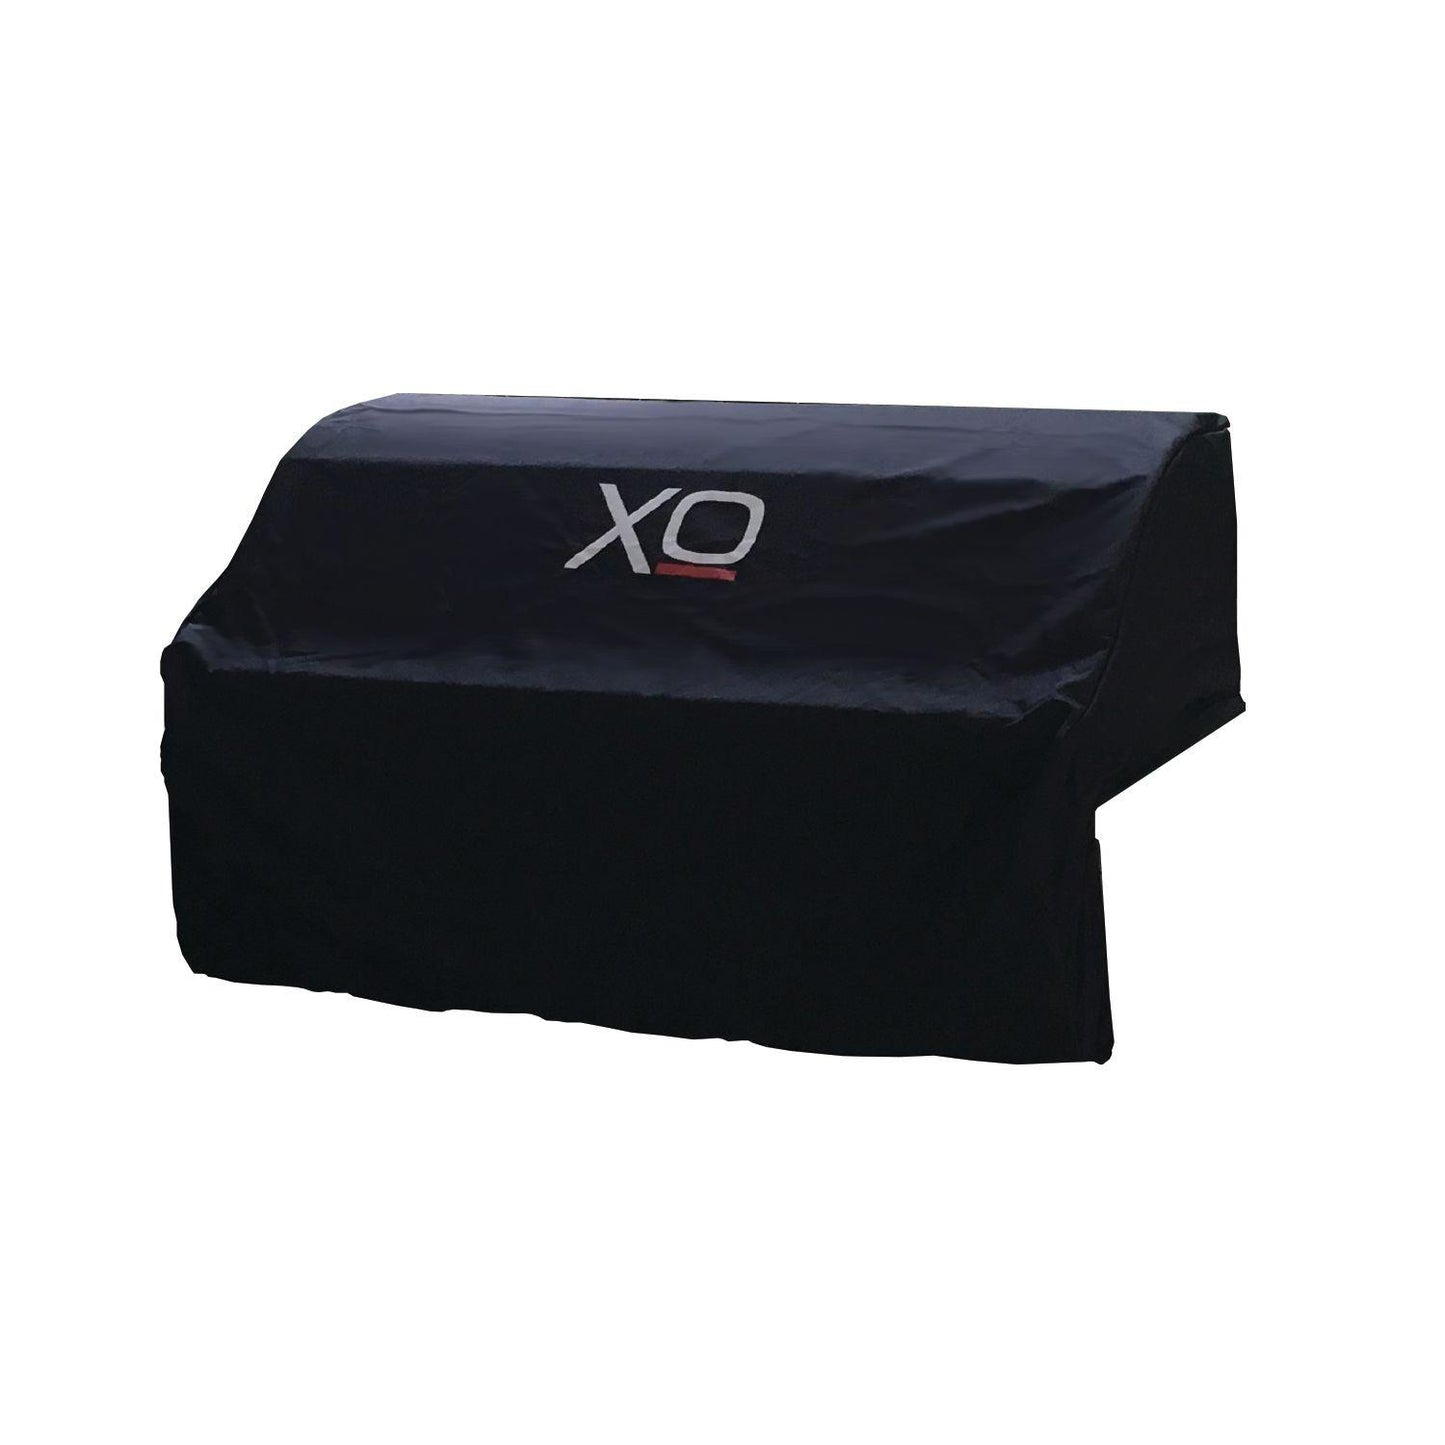 Xo Appliance XOGCOVER32BI 32" Xlt Built-In Grill Cover